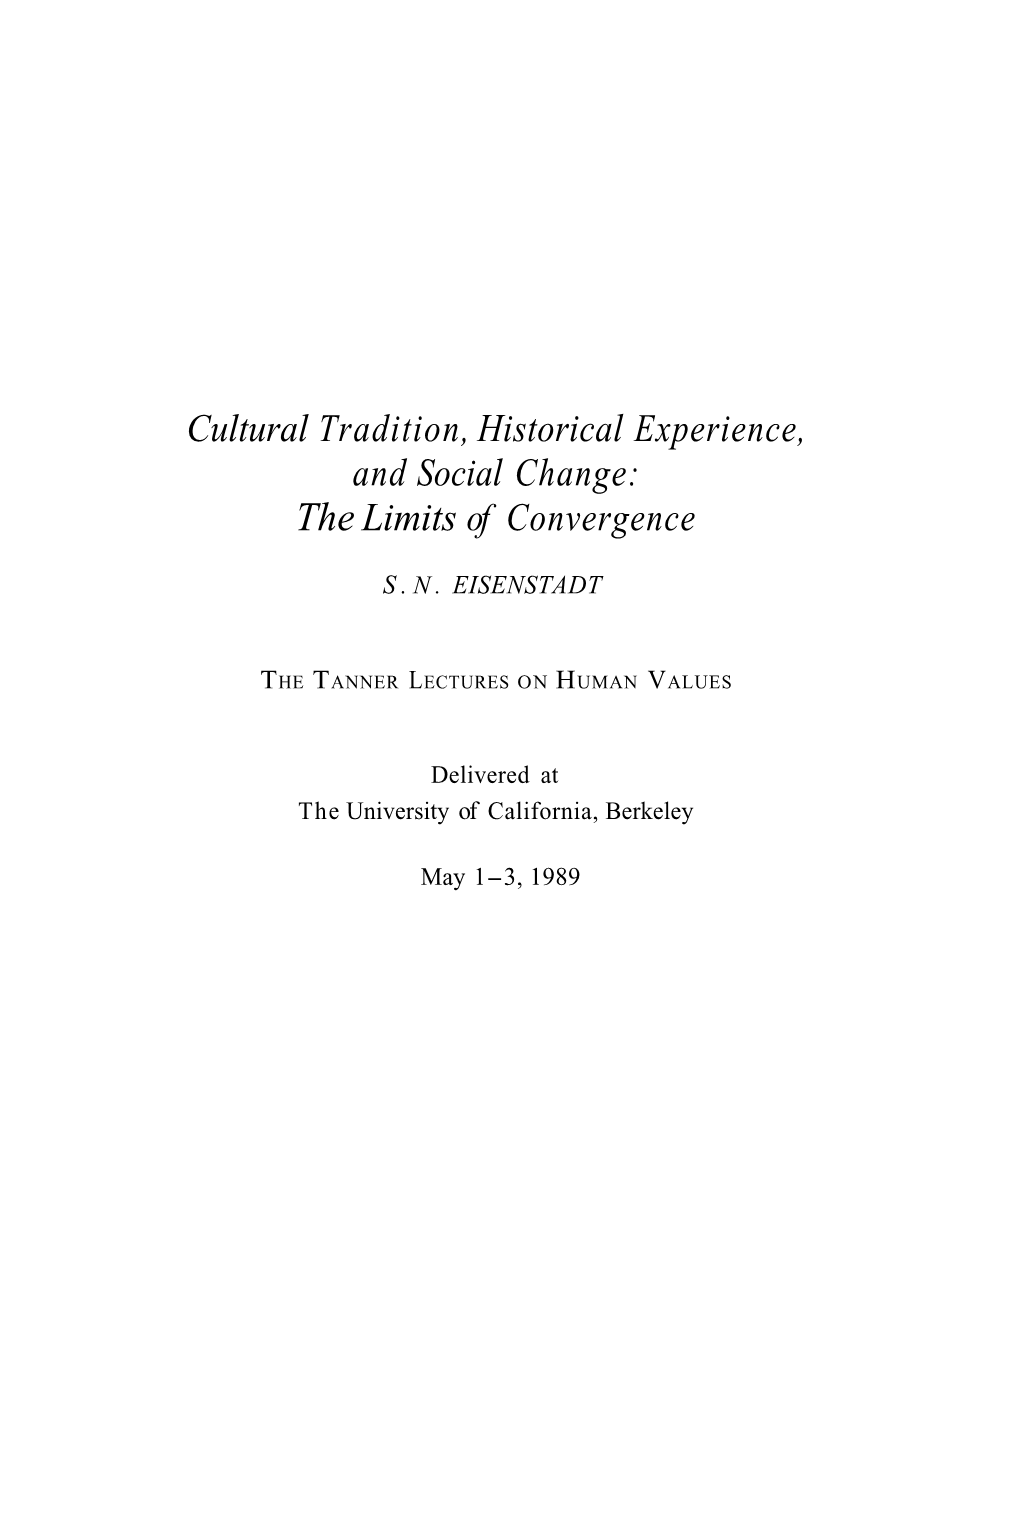 Cultural Tradition, Historical Experience, and Social Change: the Limits of Convergence